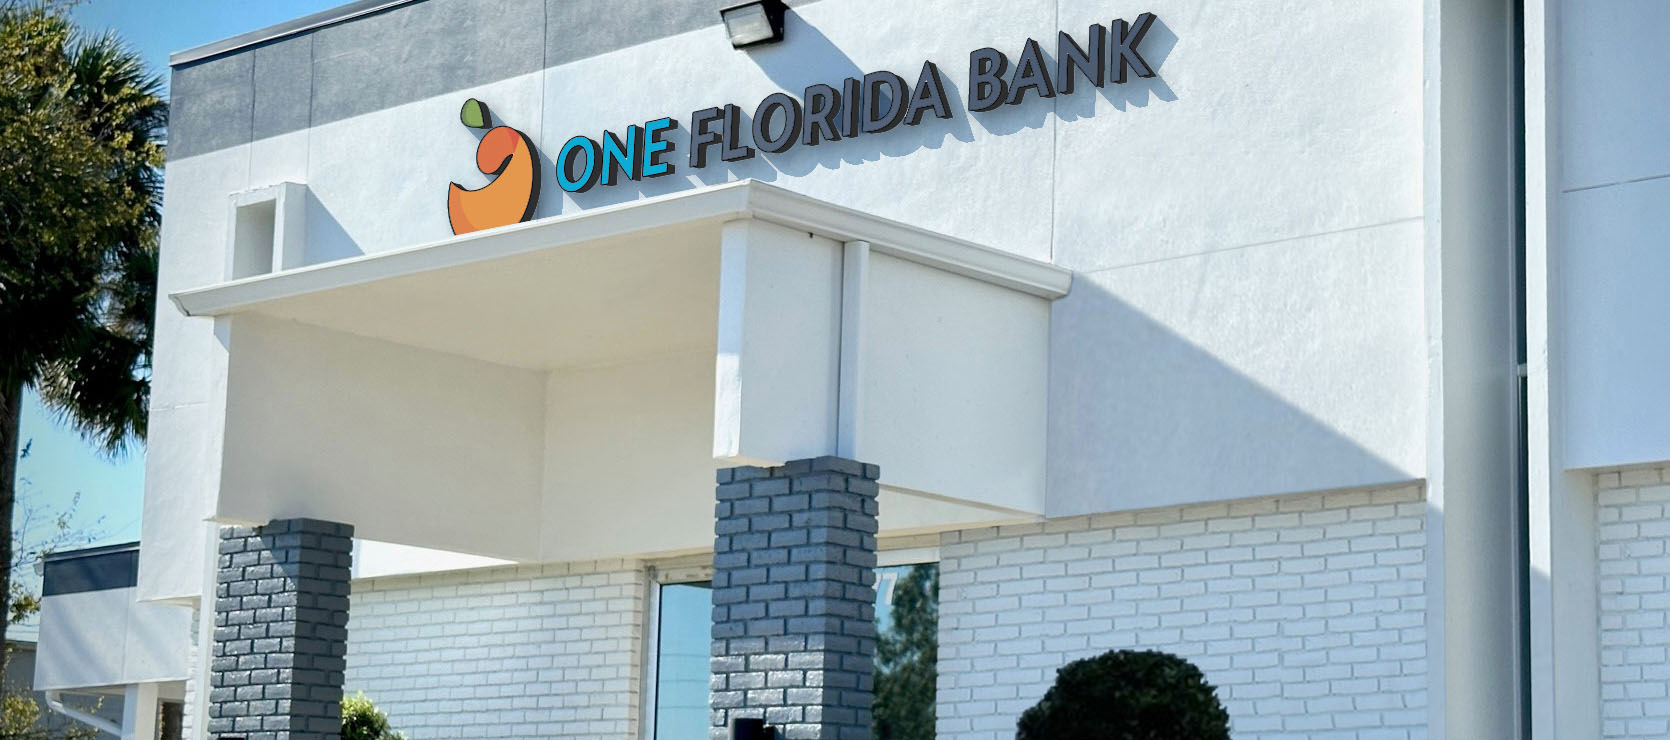 Partial picture of the front of the One Florida Bank Oviedo branch